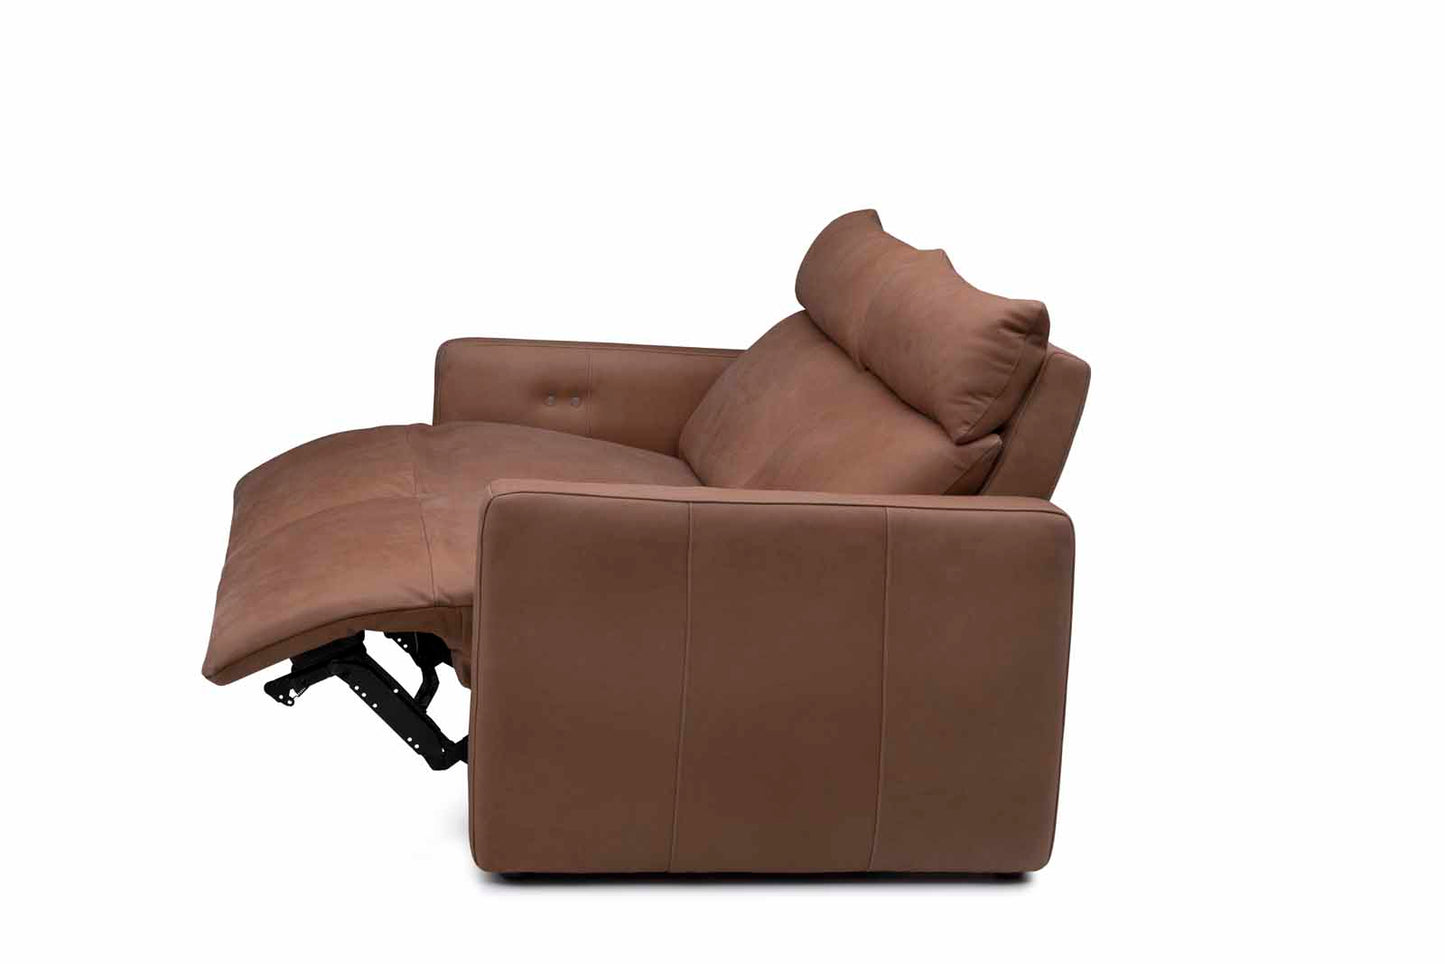 Halle 2-Seat Sofa in Camel Leather